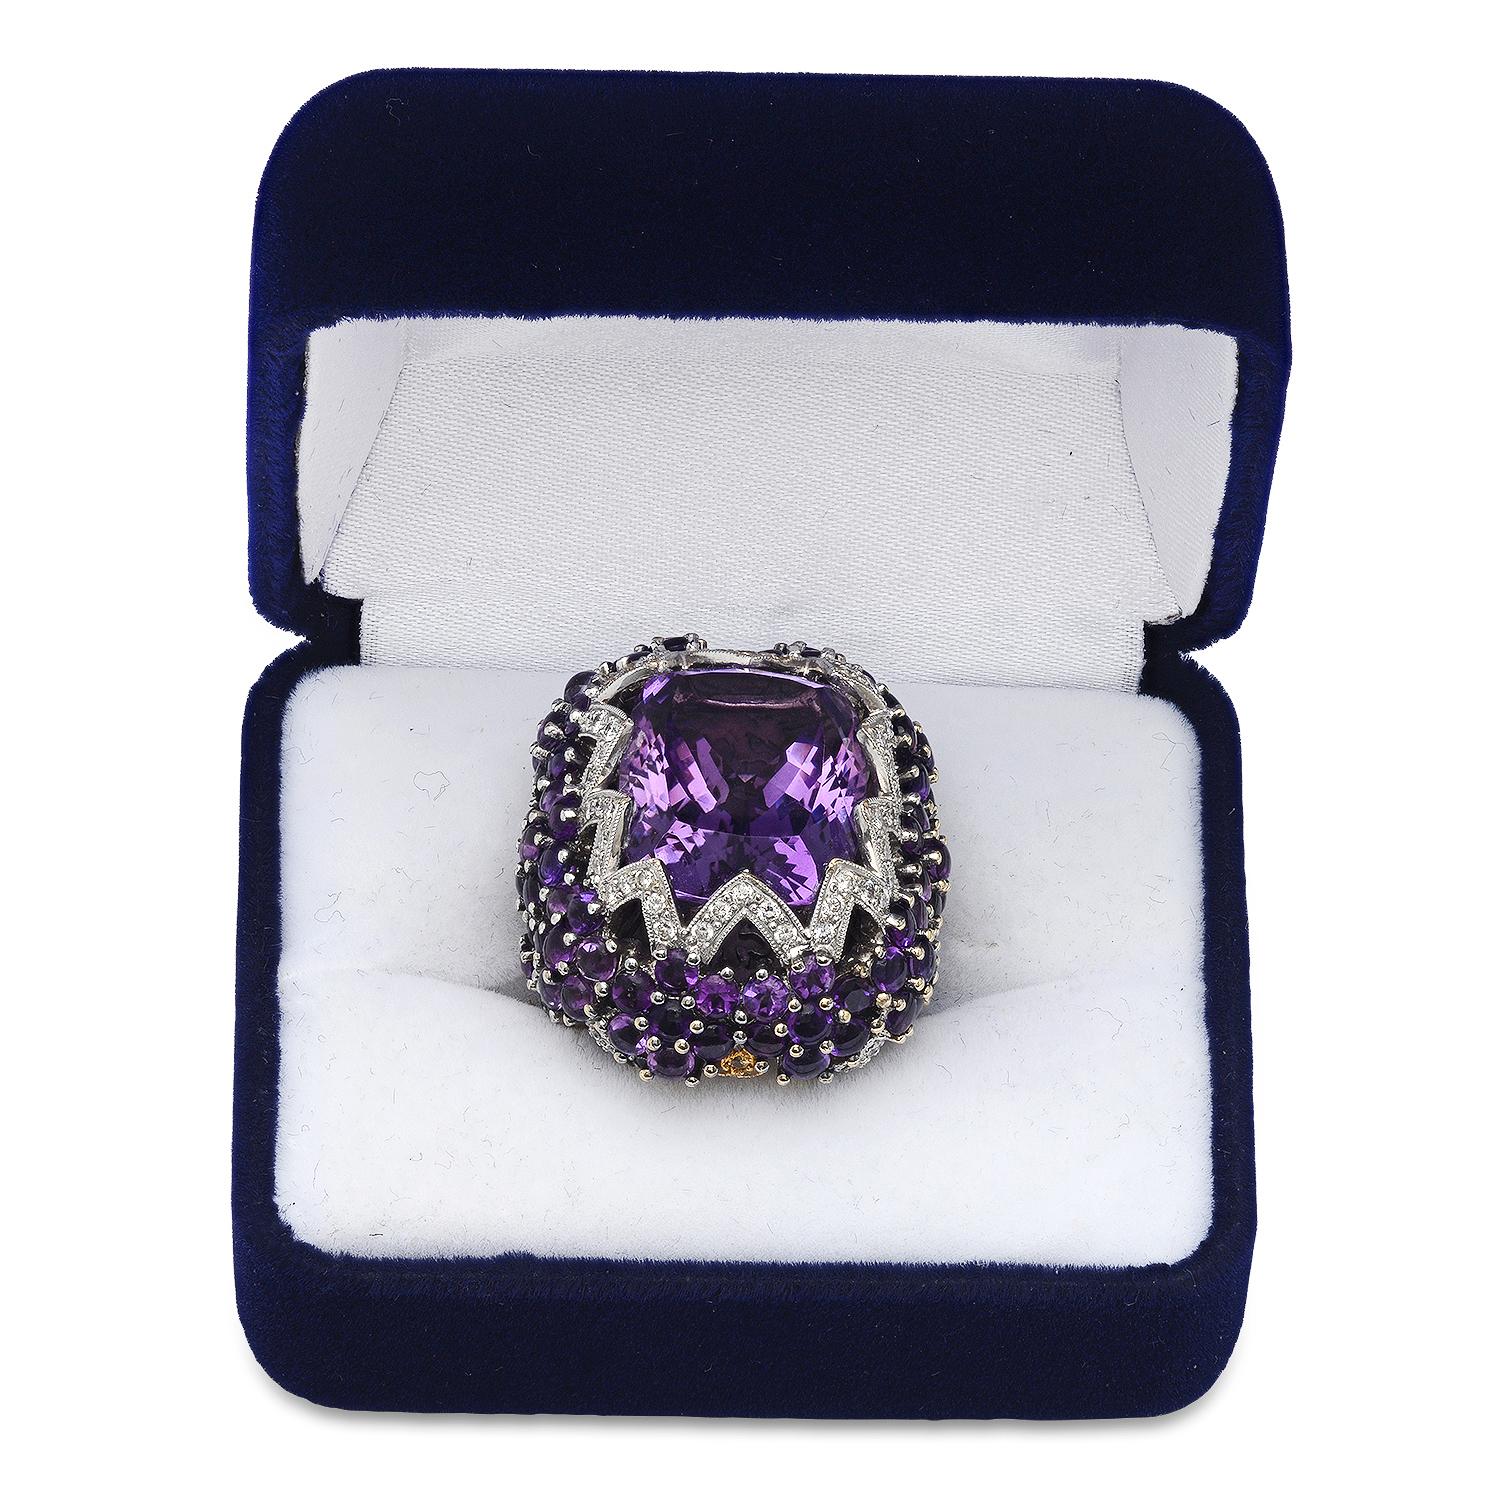 18K White Gold Setting with 30.5ct Amethyst, 0.76ct Sapphire and 1.18ct Diamond Ladies Ring